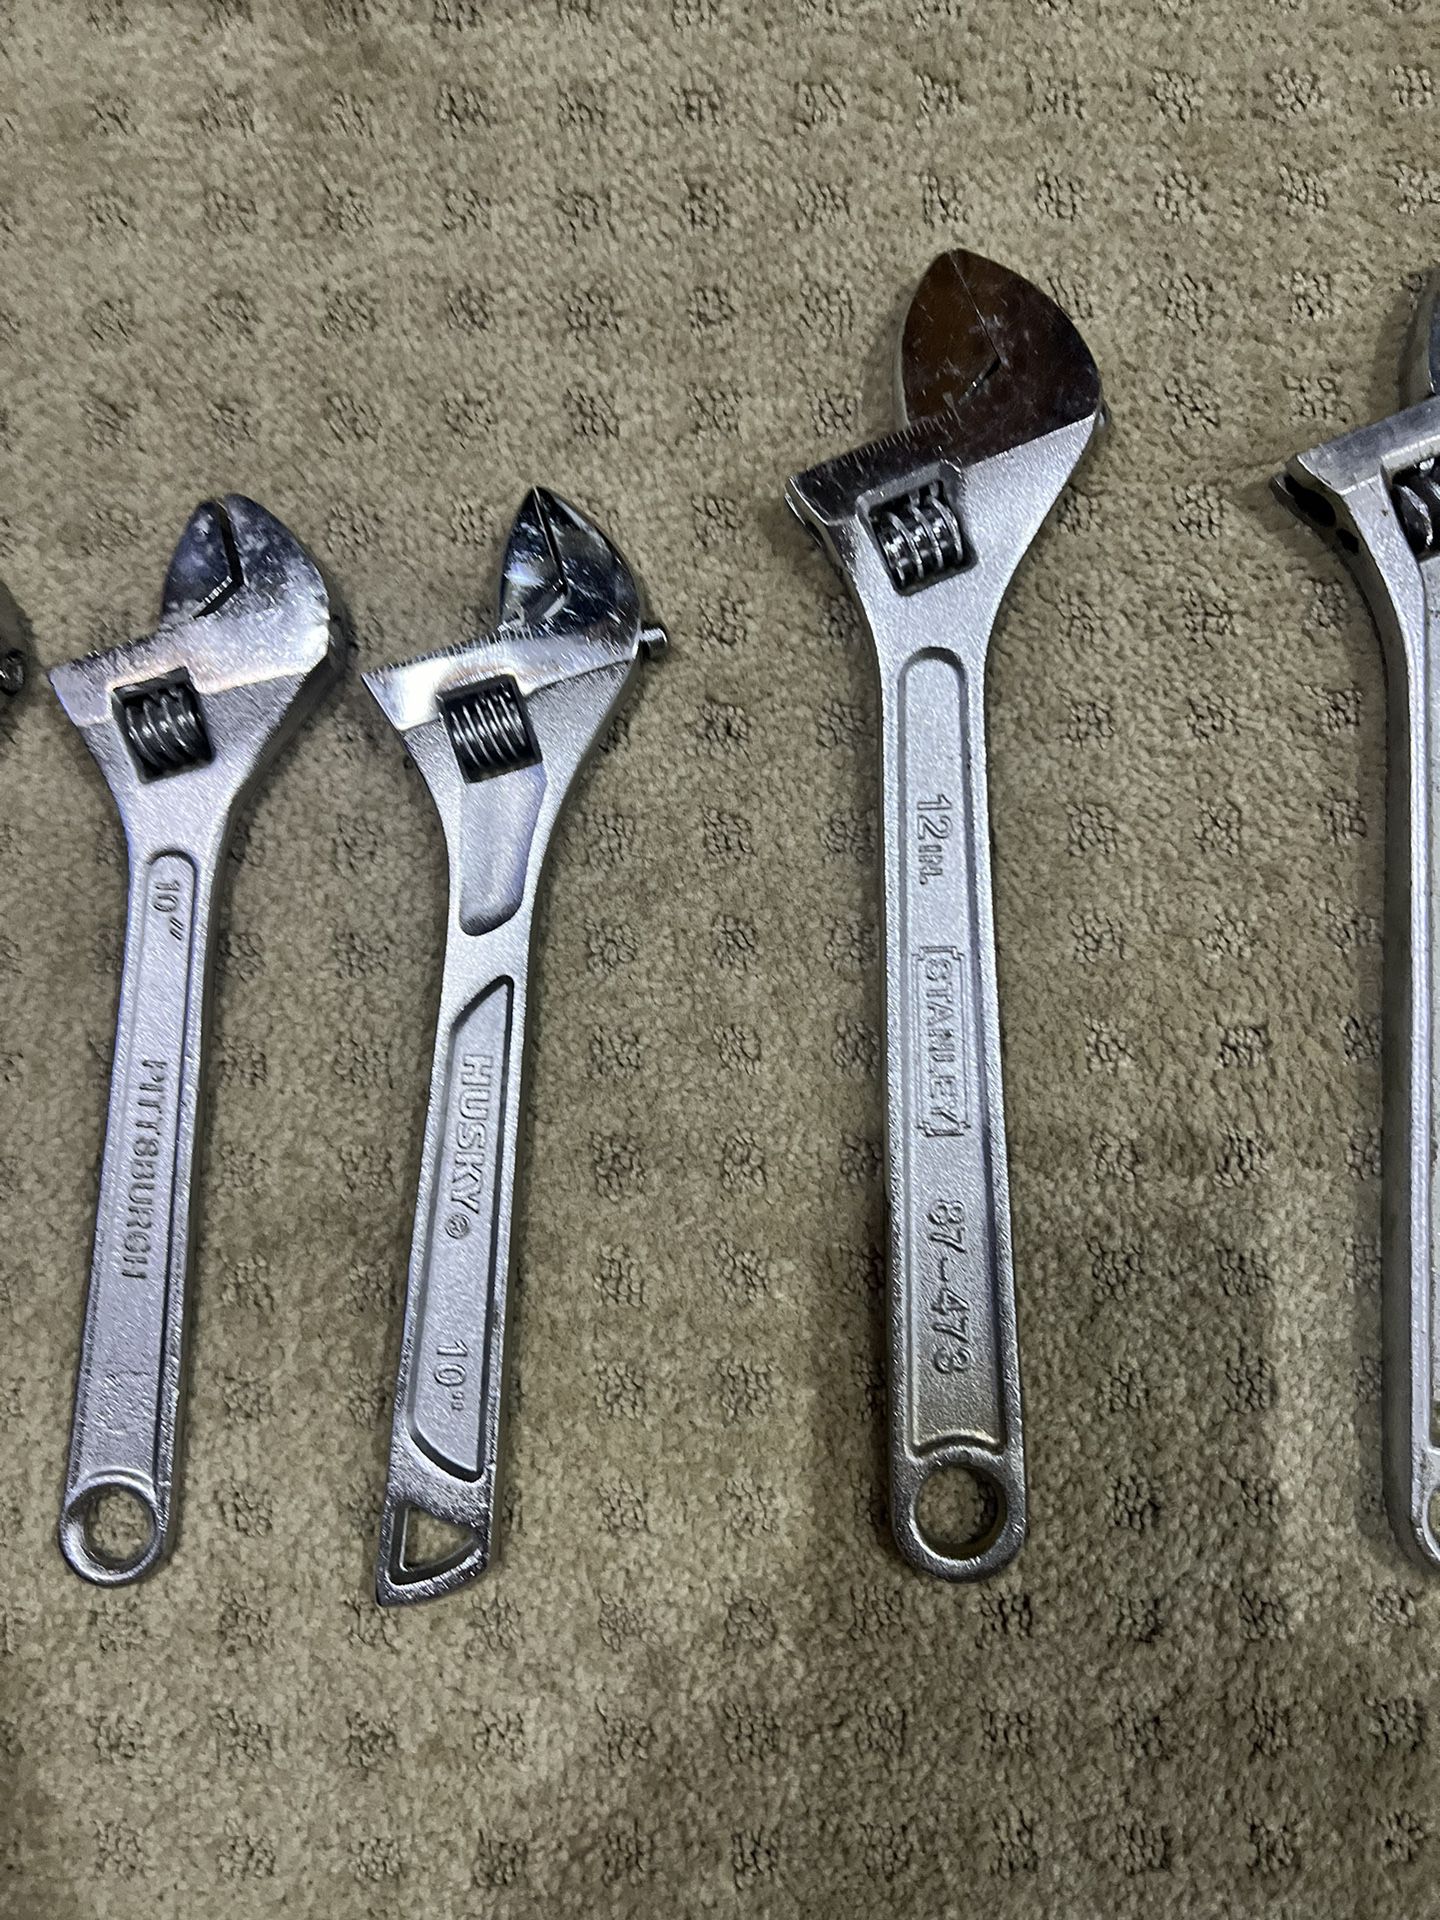 Different Crescent Wrenches 